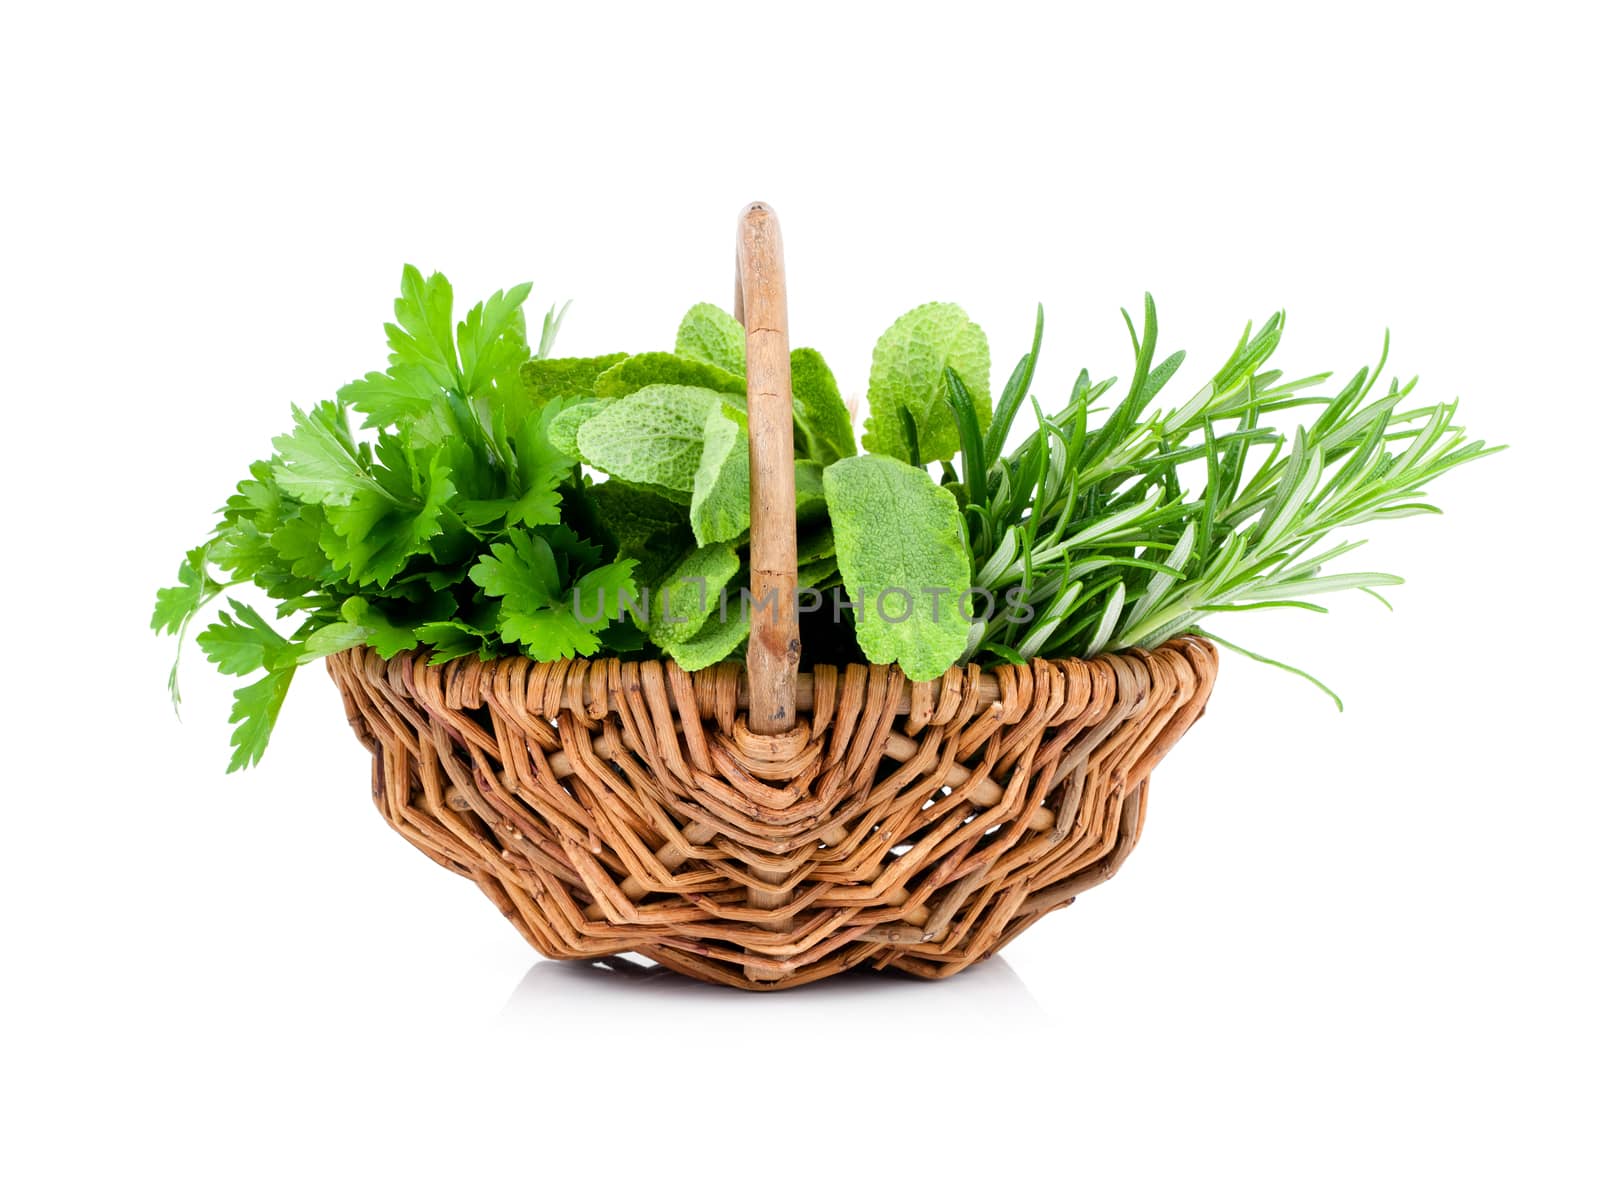 sage, parsley and rosemary in wicker basket, on a white backgrou by motorolka